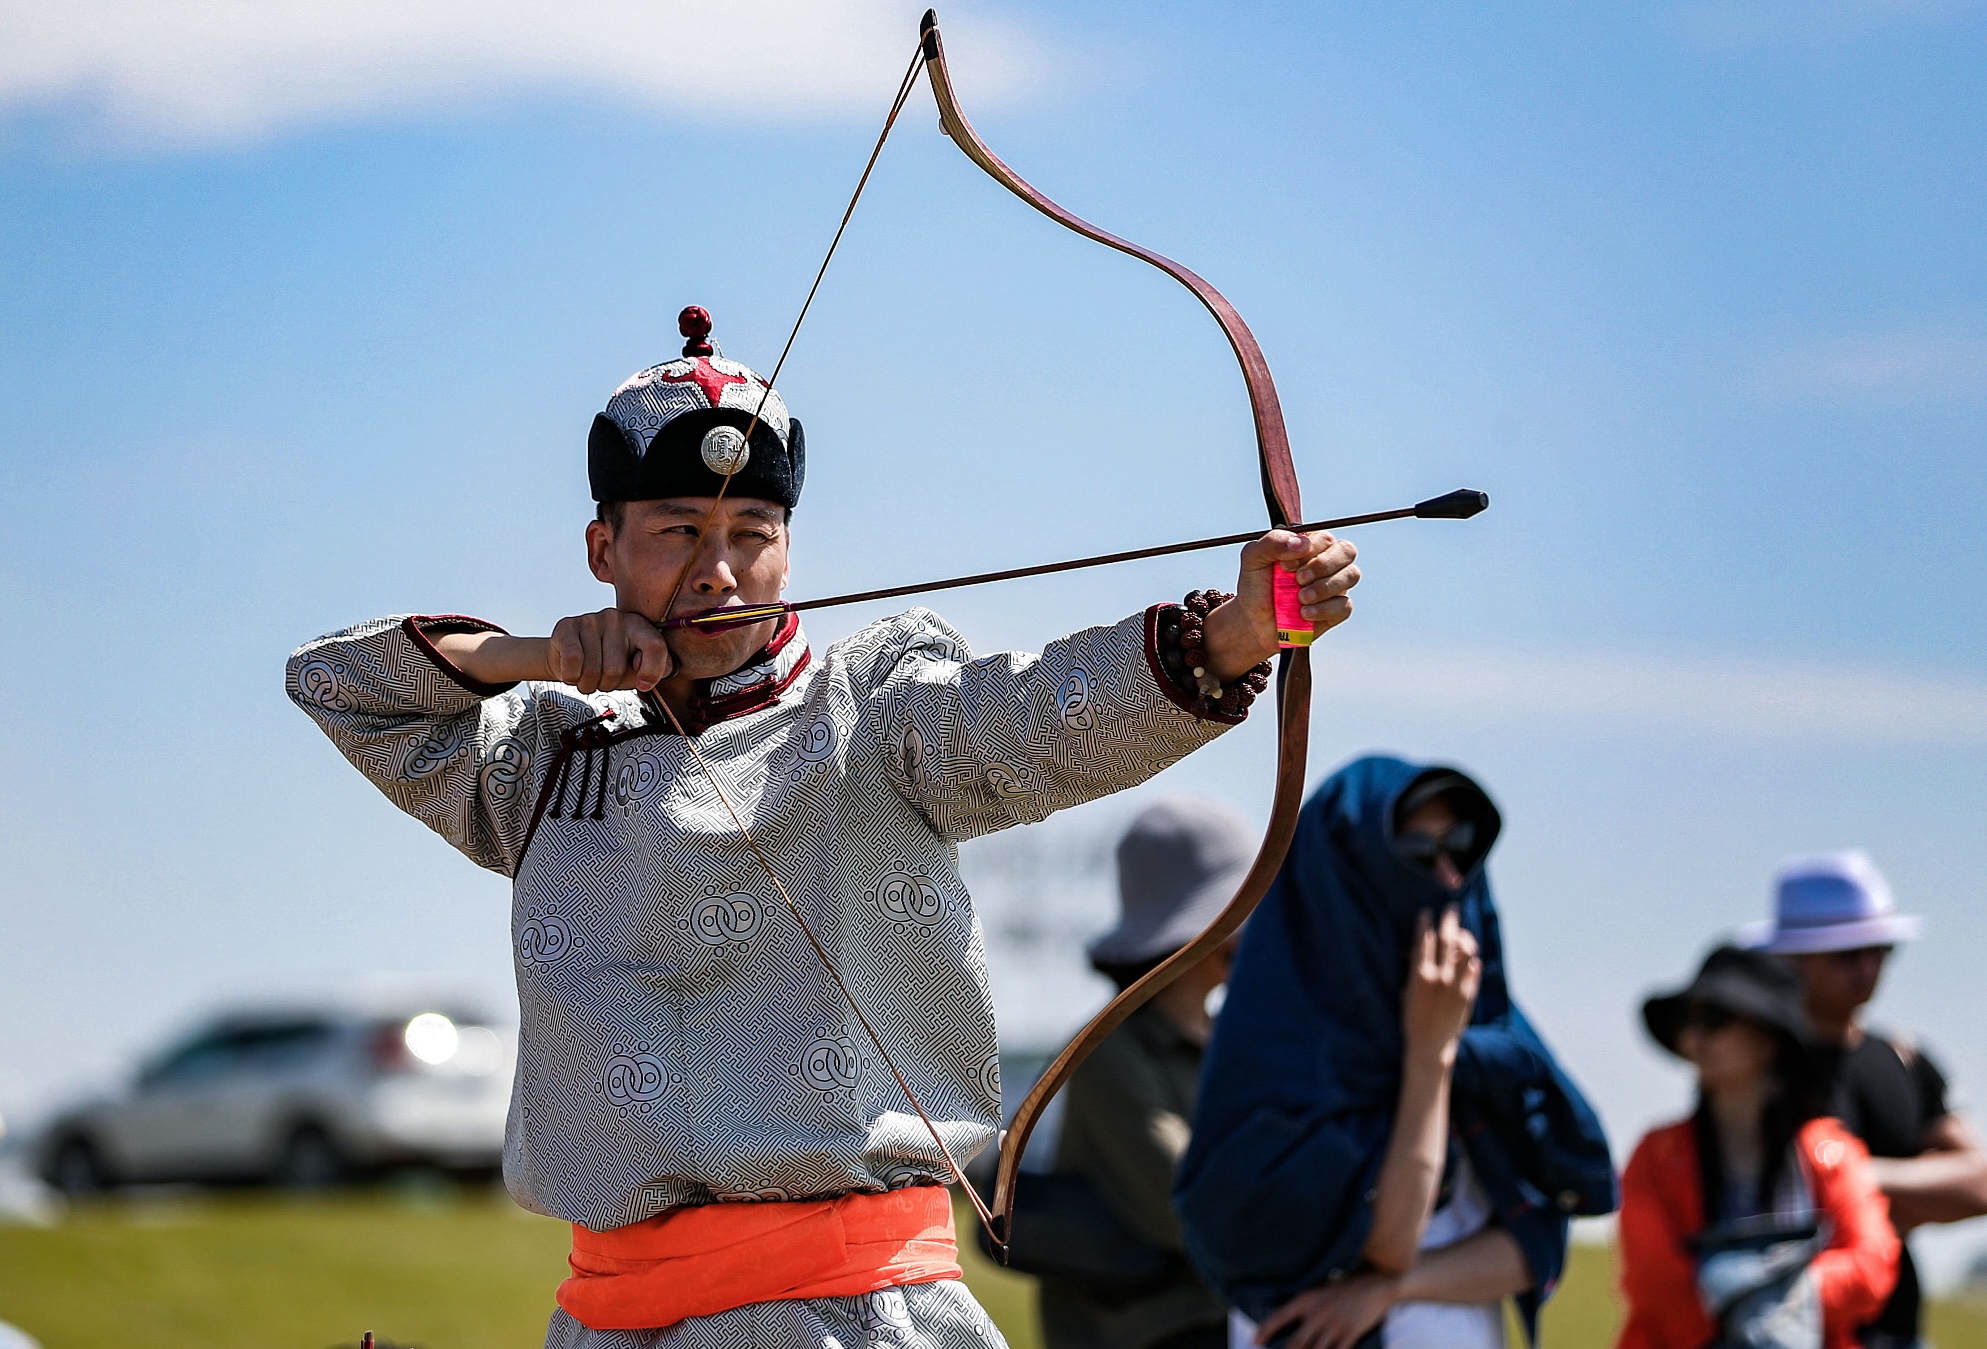 A file photo shows a man taking part in an archery tournament during the Naadam Festival in Inner Mongolia. /CFP